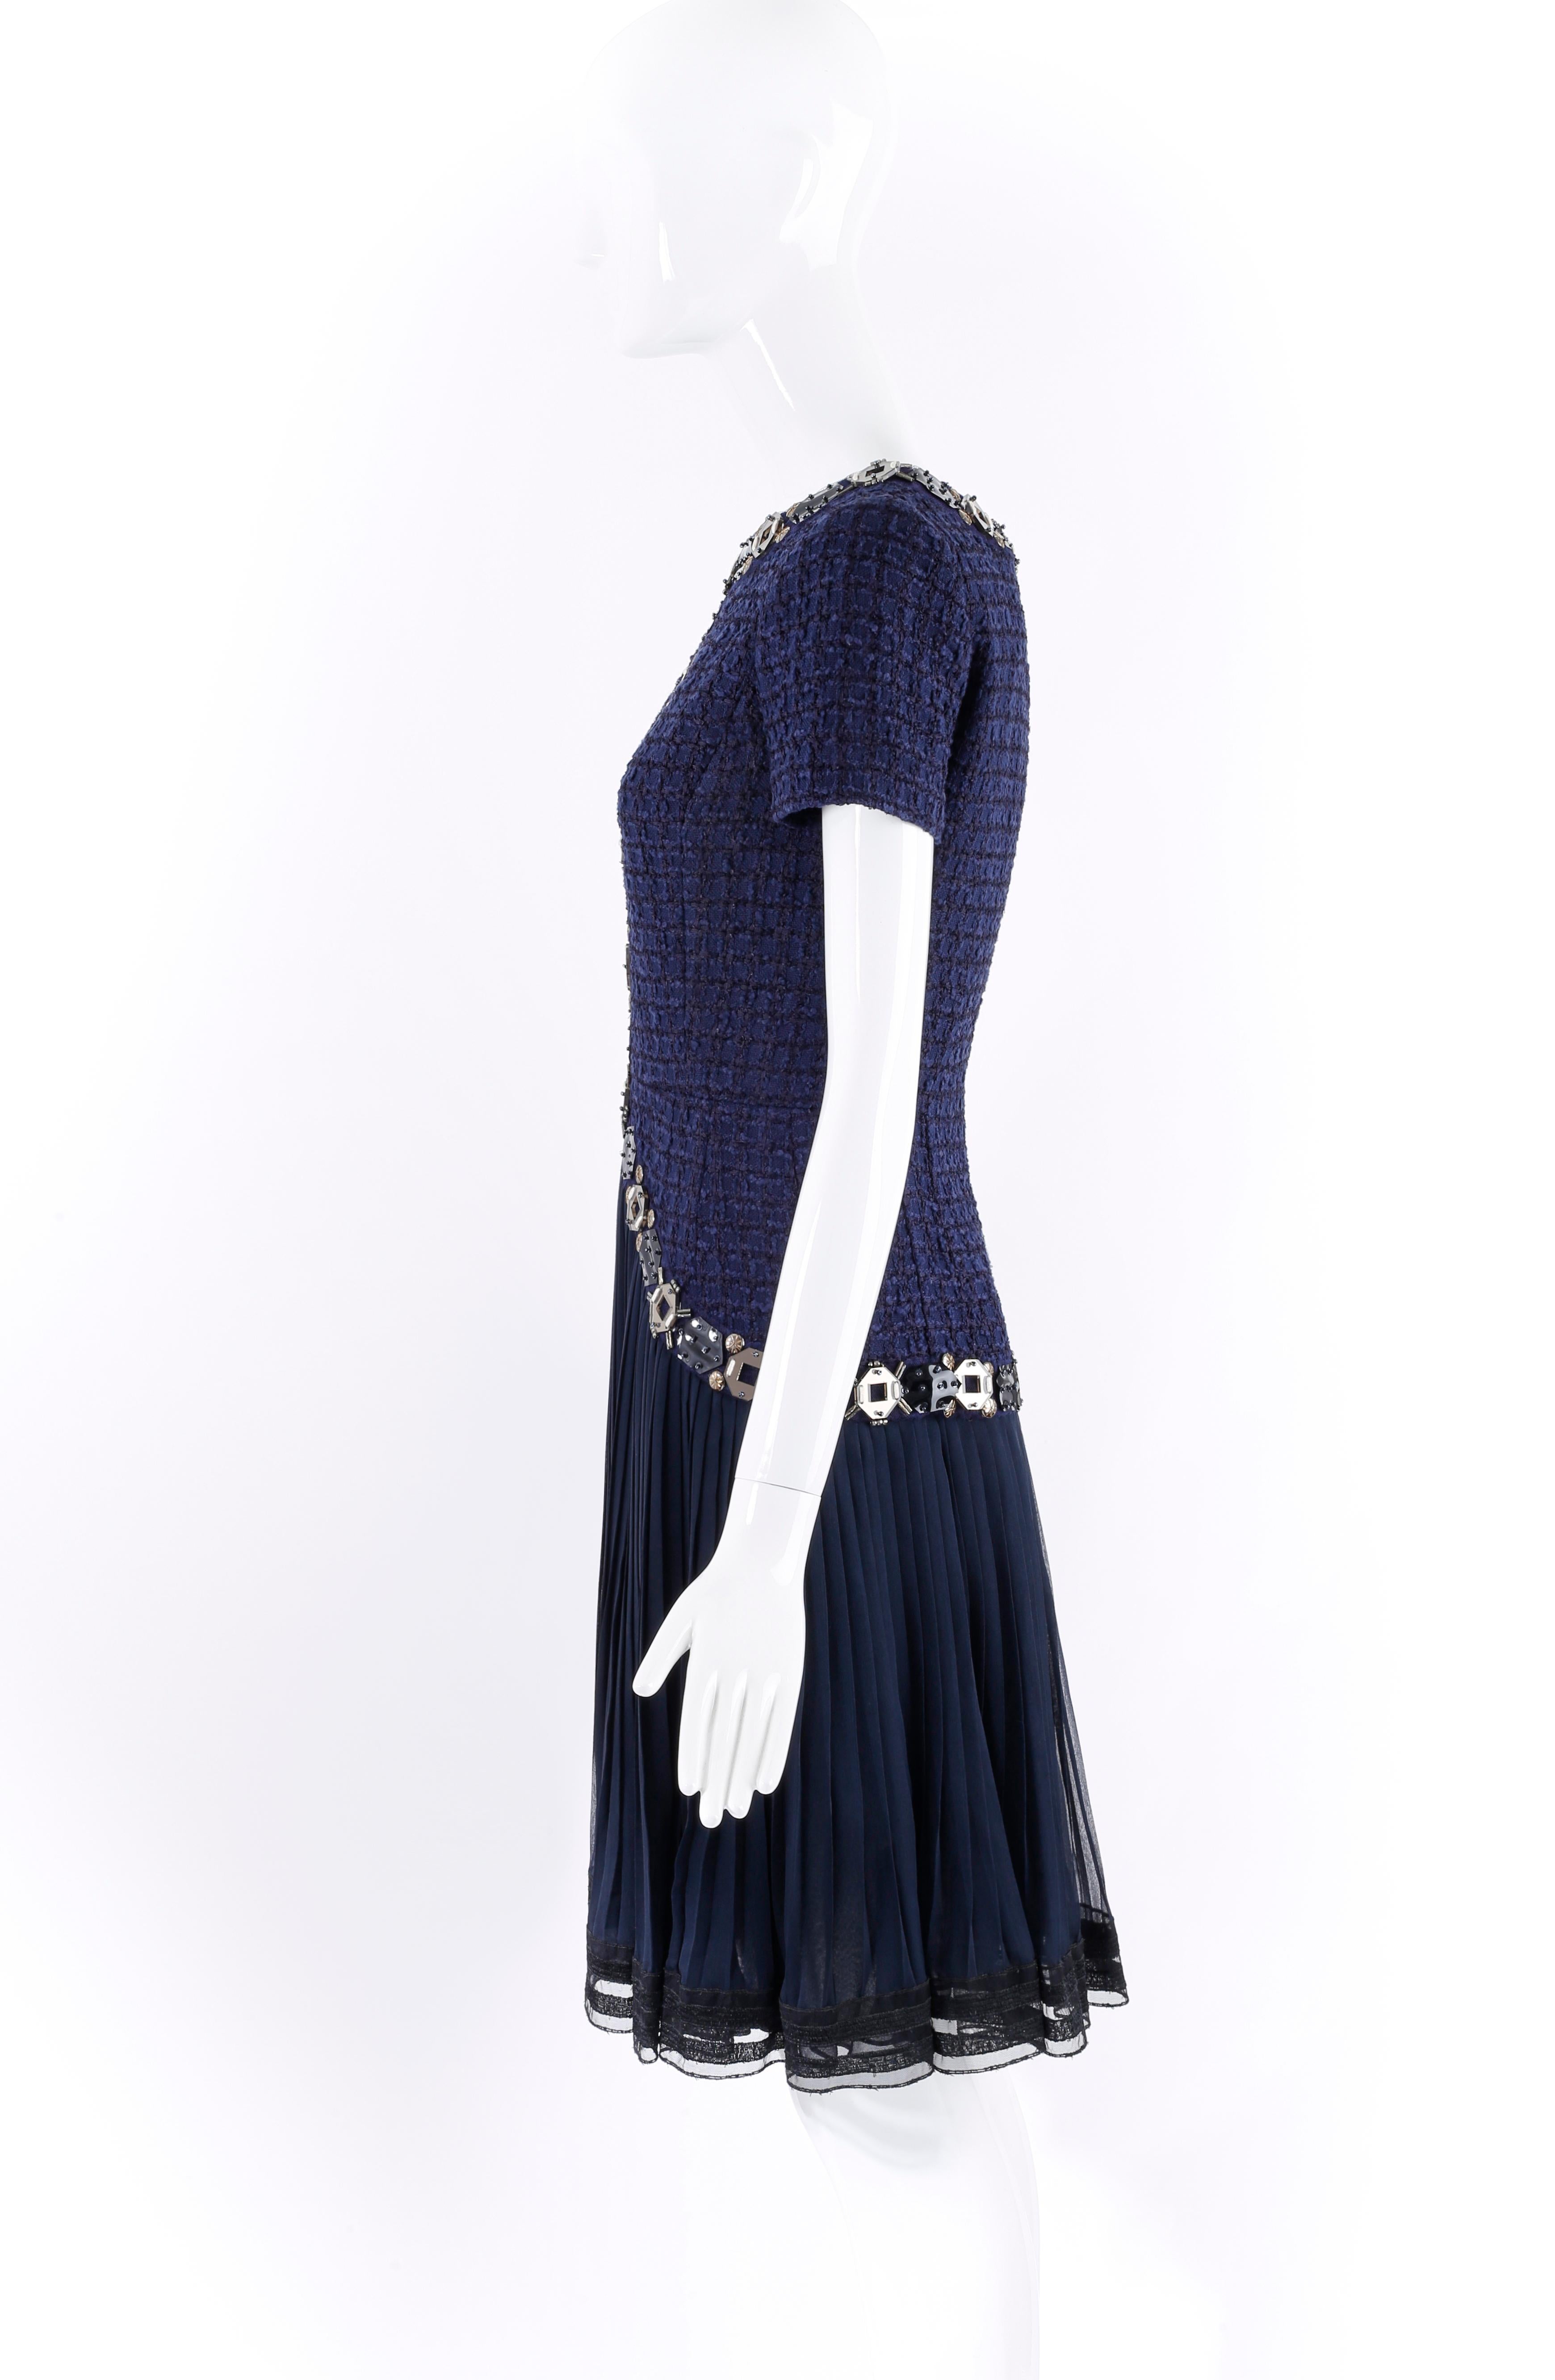 Oscar De La Renta Resort 2010 Blue Embellished Tweed Fit & Flare Pleated Dress 4 In Good Condition For Sale In Chicago, IL